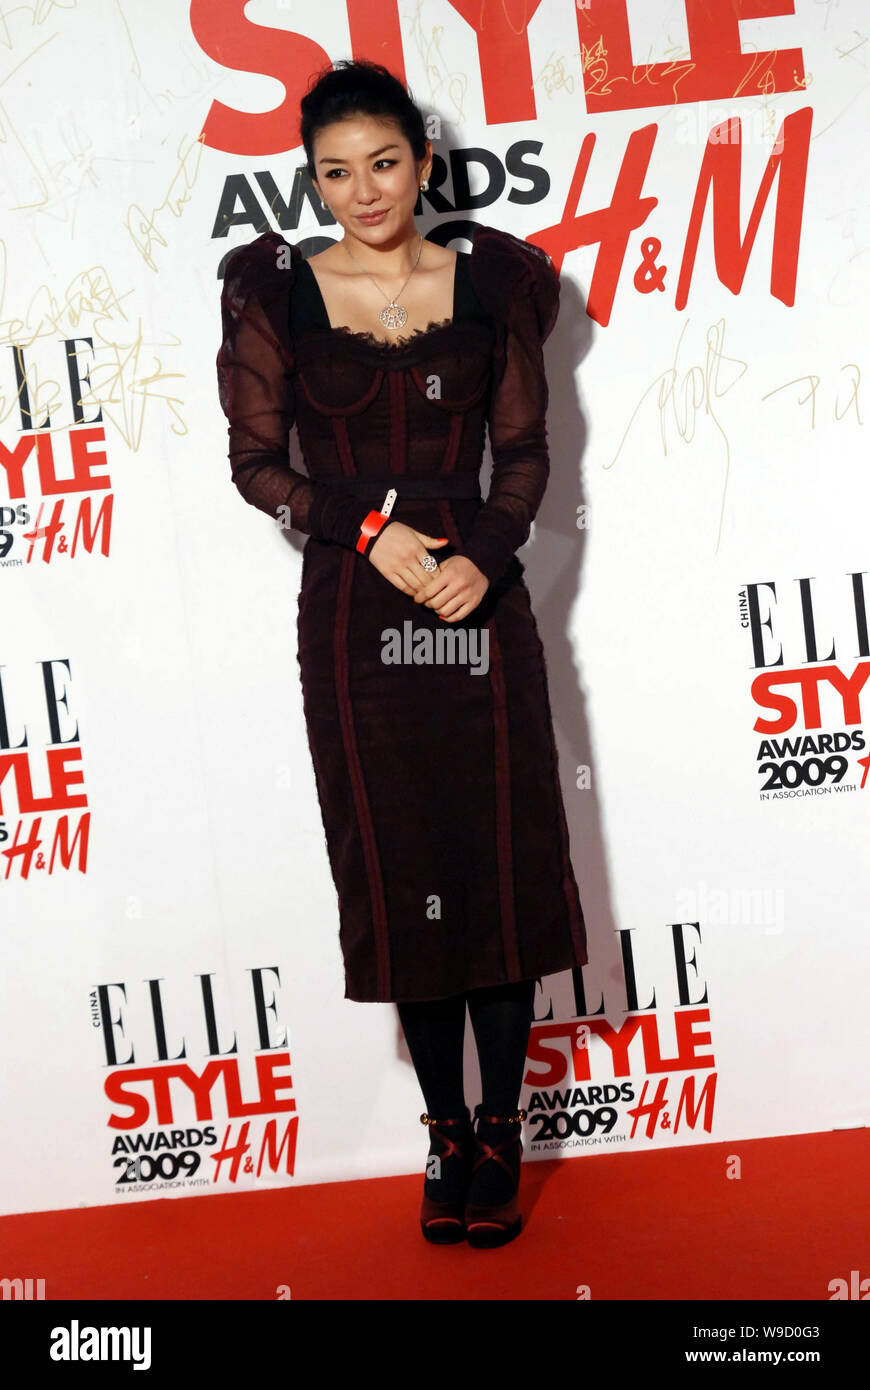 Chinese actress Huang Yi is seen at the red carpet ceremony of ELLE Style Awards 2009 in Shanghai, China, 17 December 2009. Stock Photo